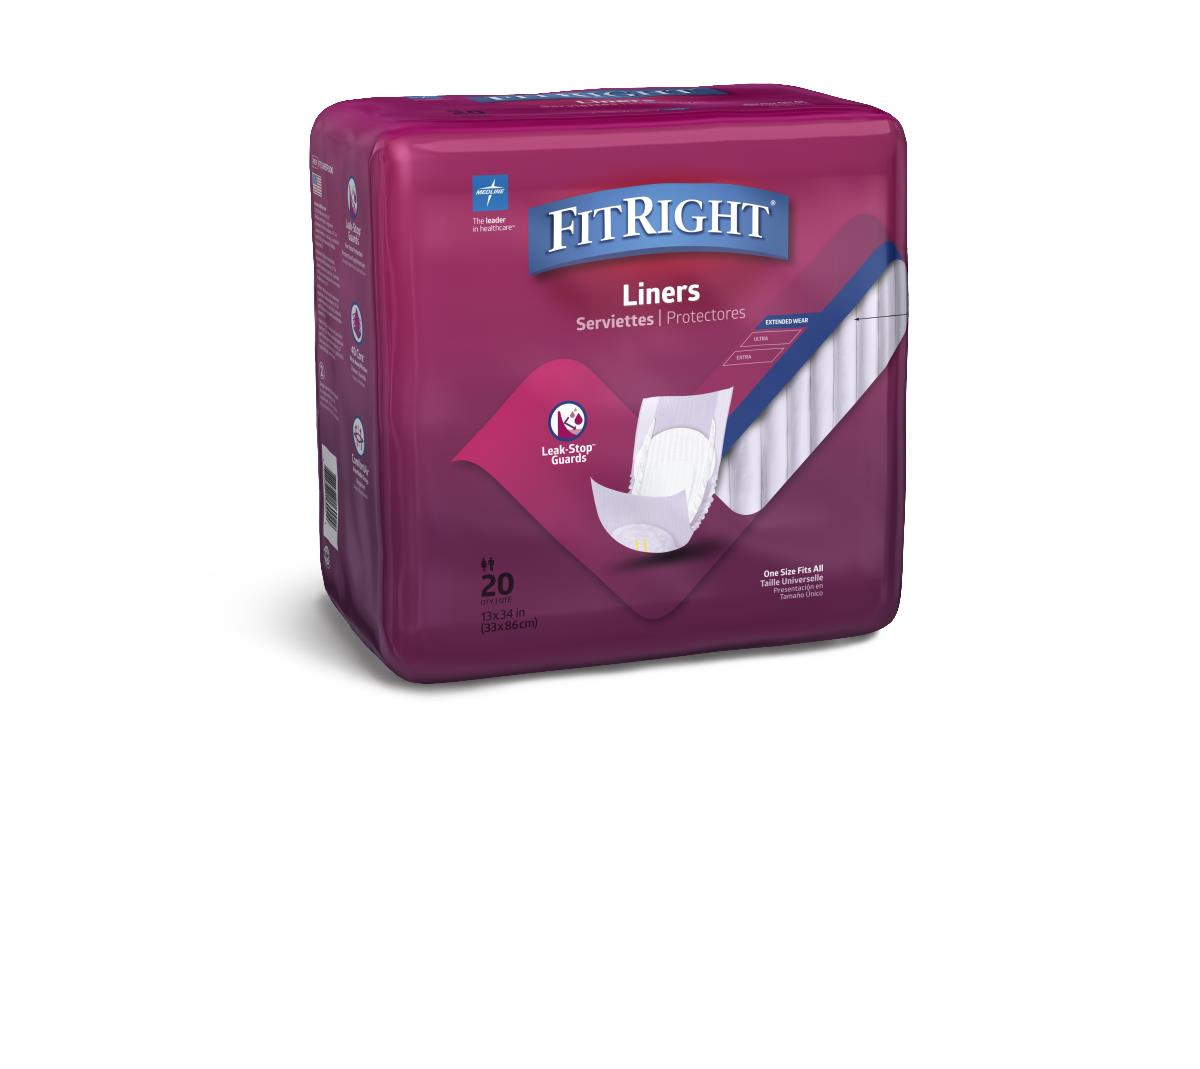 FitRight 13 X 34 Maximum Absorbency Liner FITLINER500